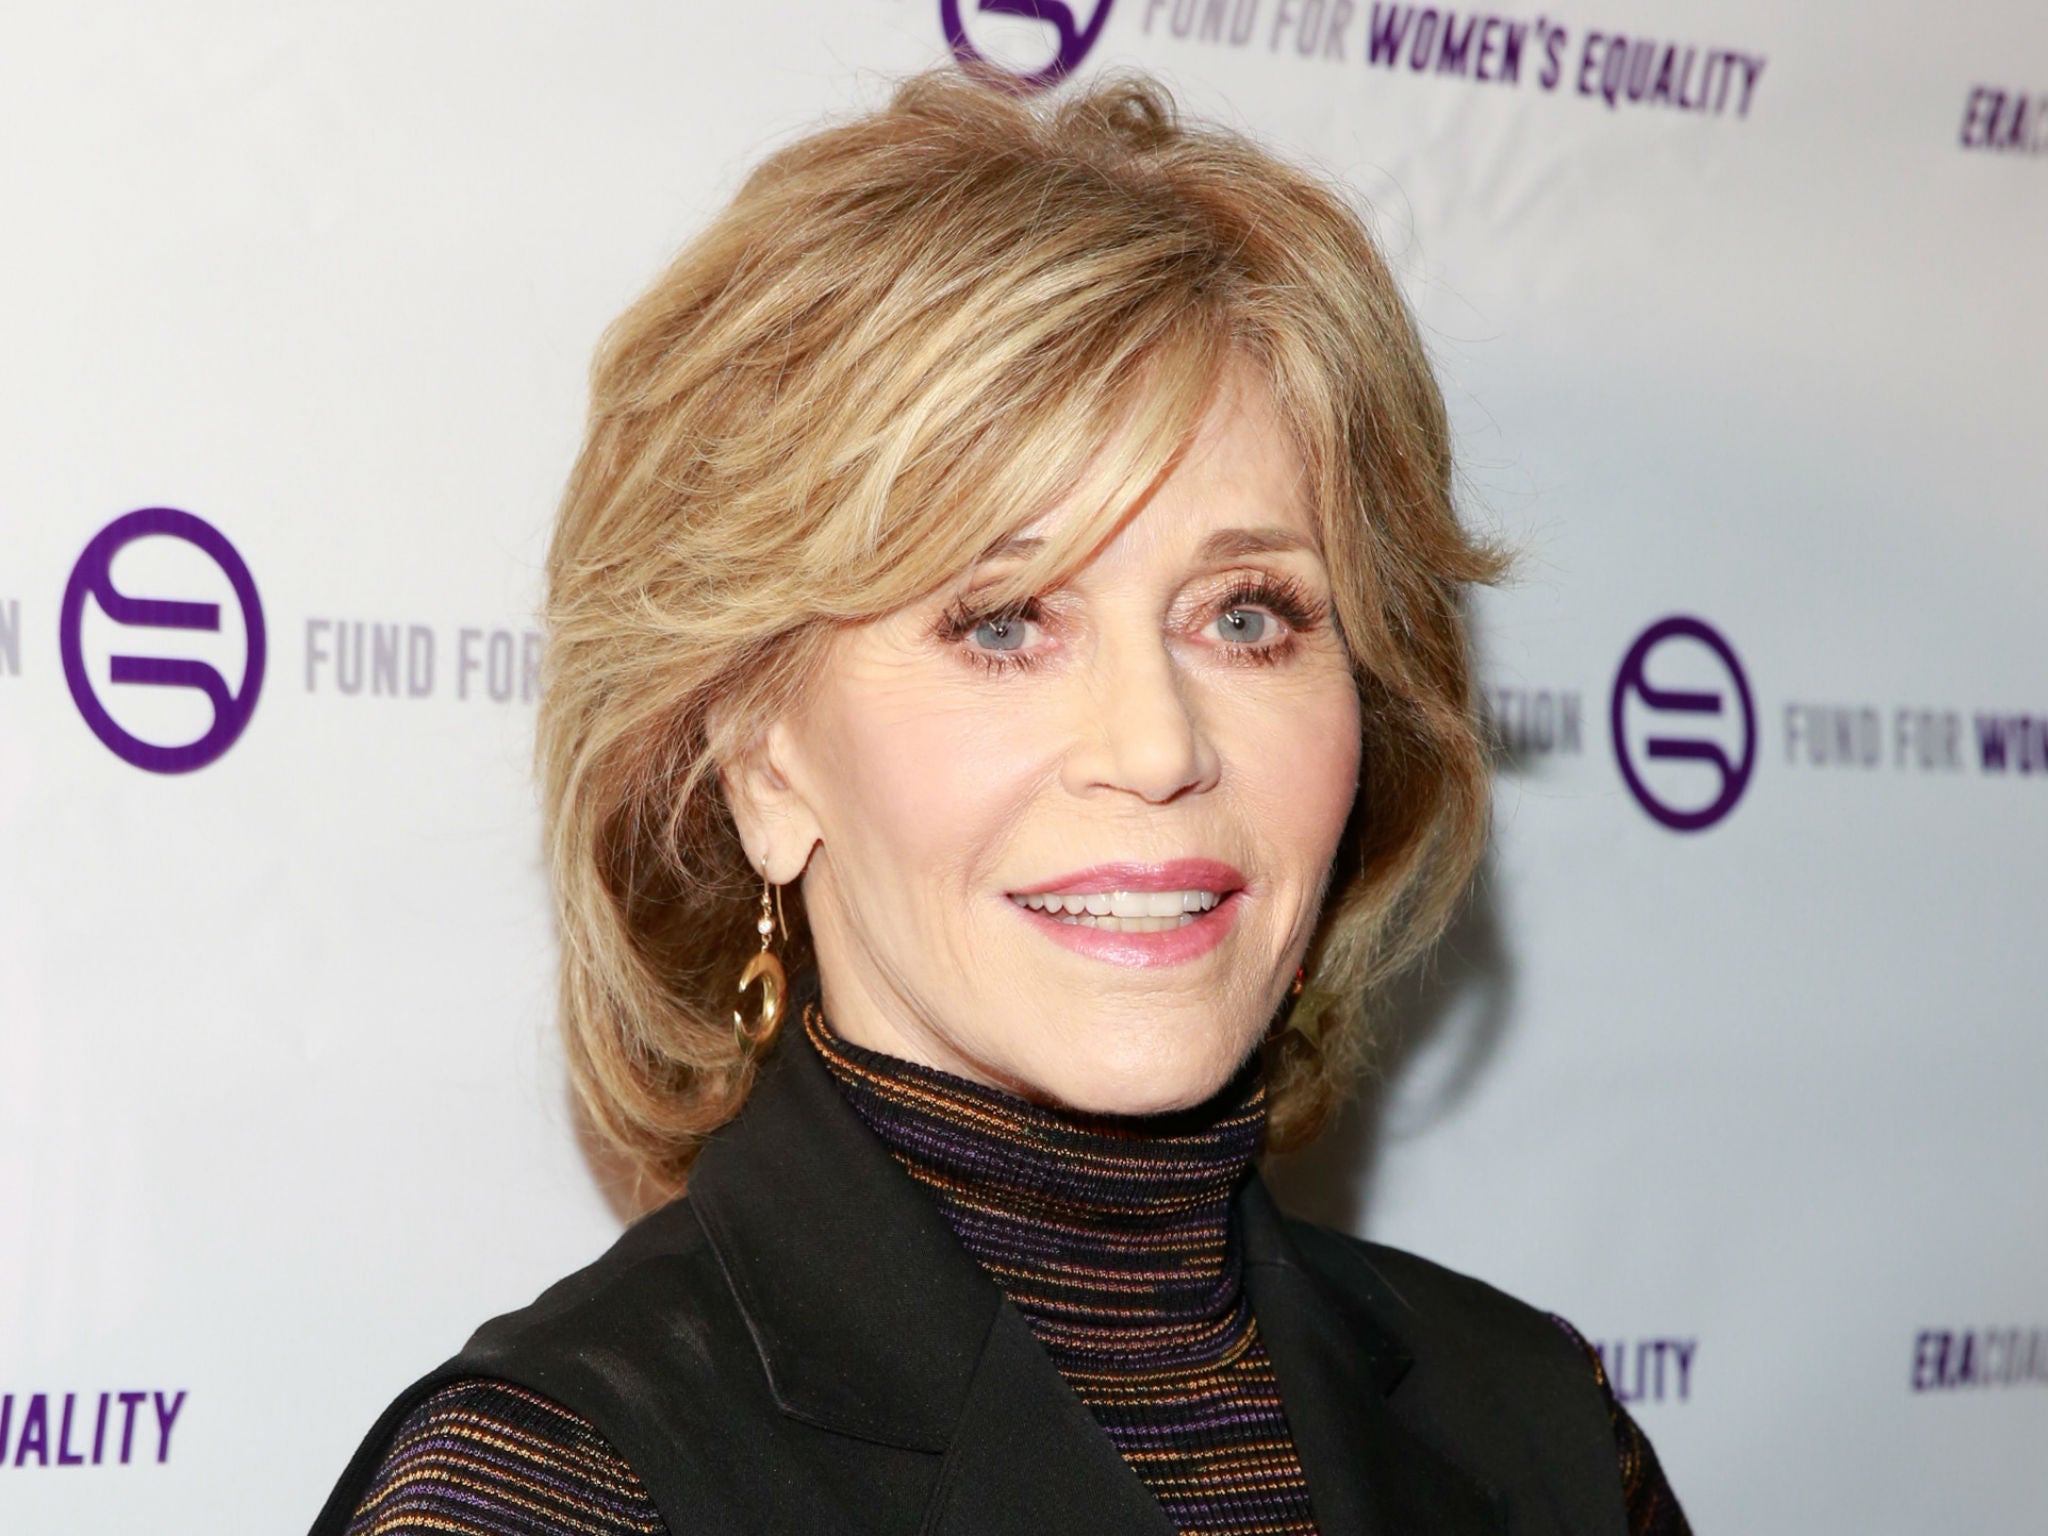 The 78-year-old Oscar-winning actress said she tried to be 'perfect' for her three husbands